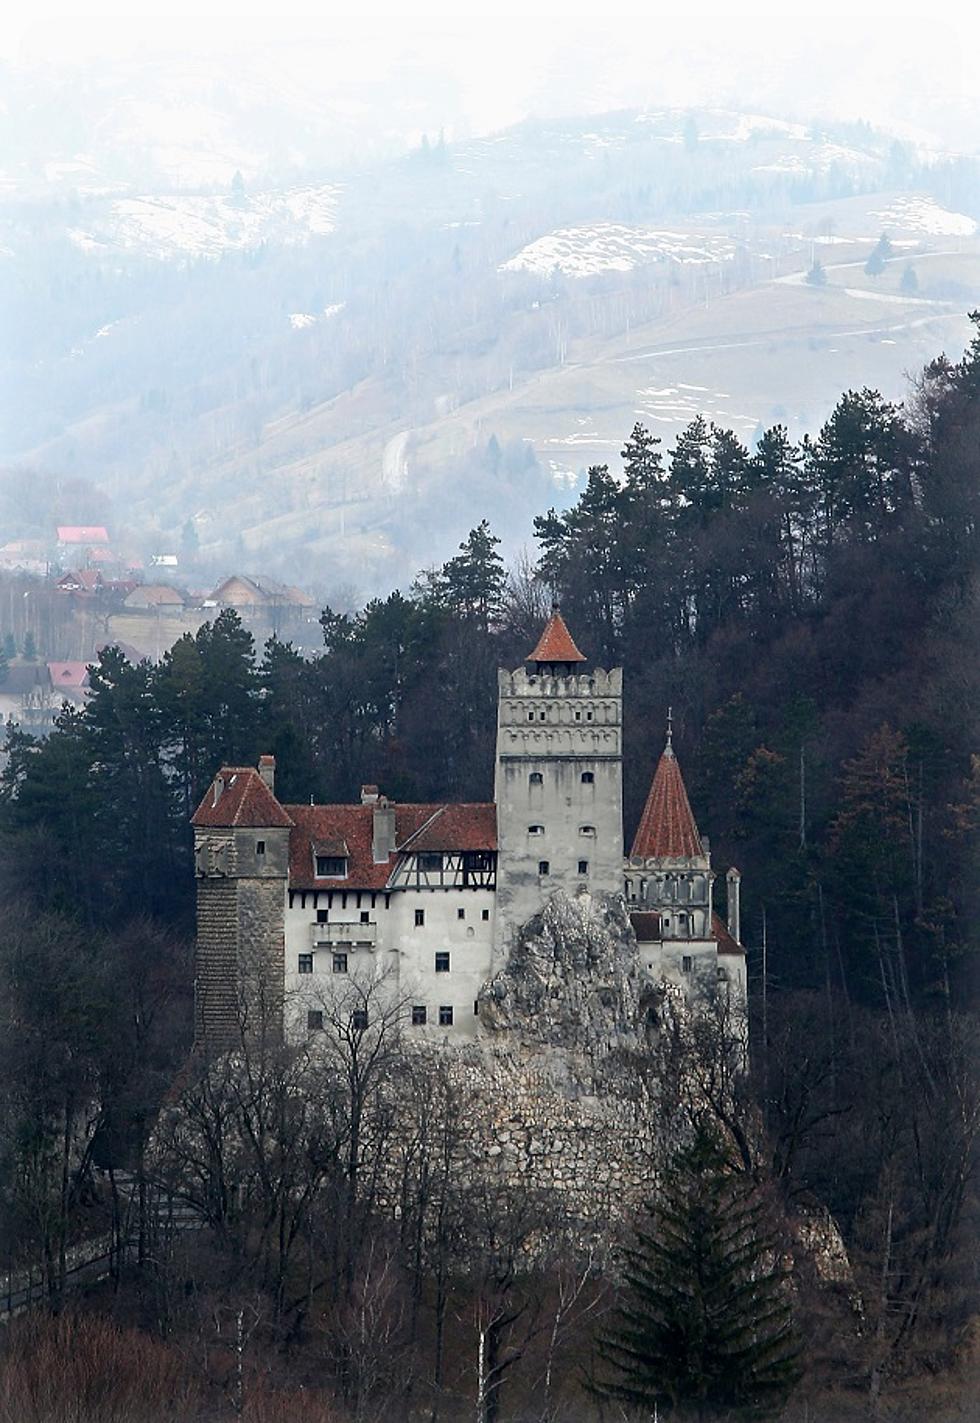 Want To Buy Dracula’s Castle?